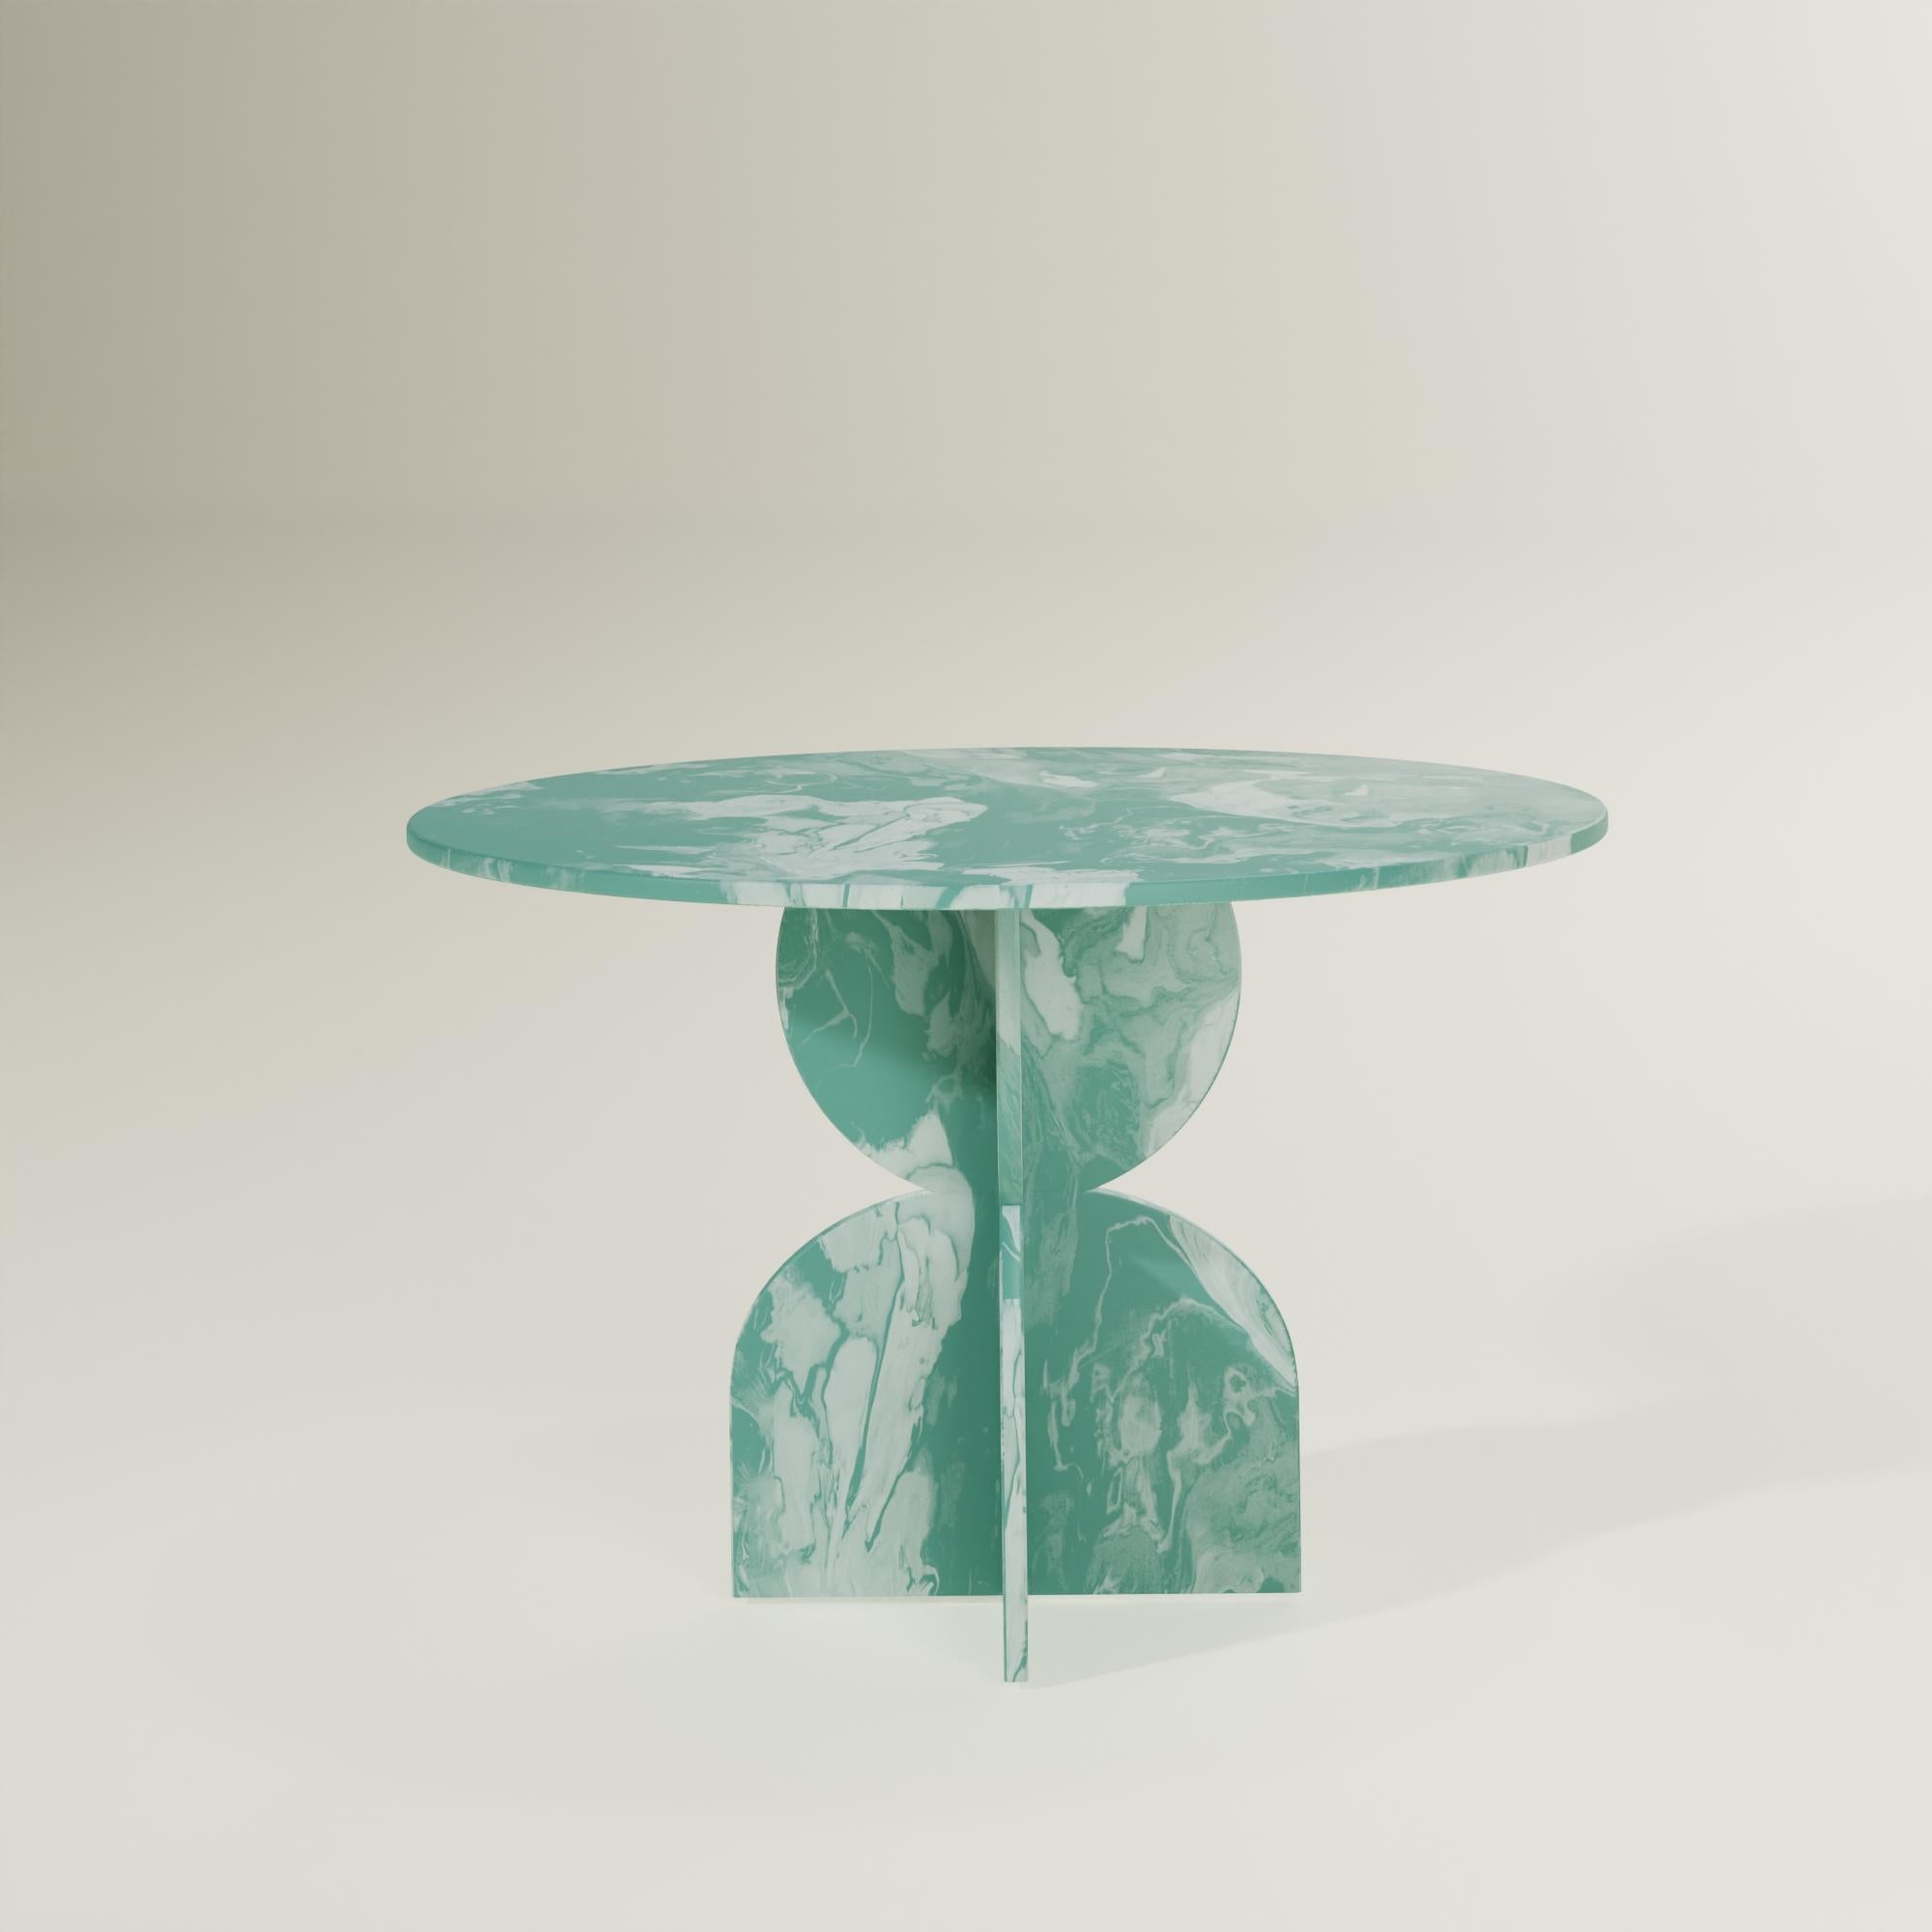 Modern Contemporary Green Round Table Handcrafted 100% Recycled Plastic by Anqa Studios For Sale